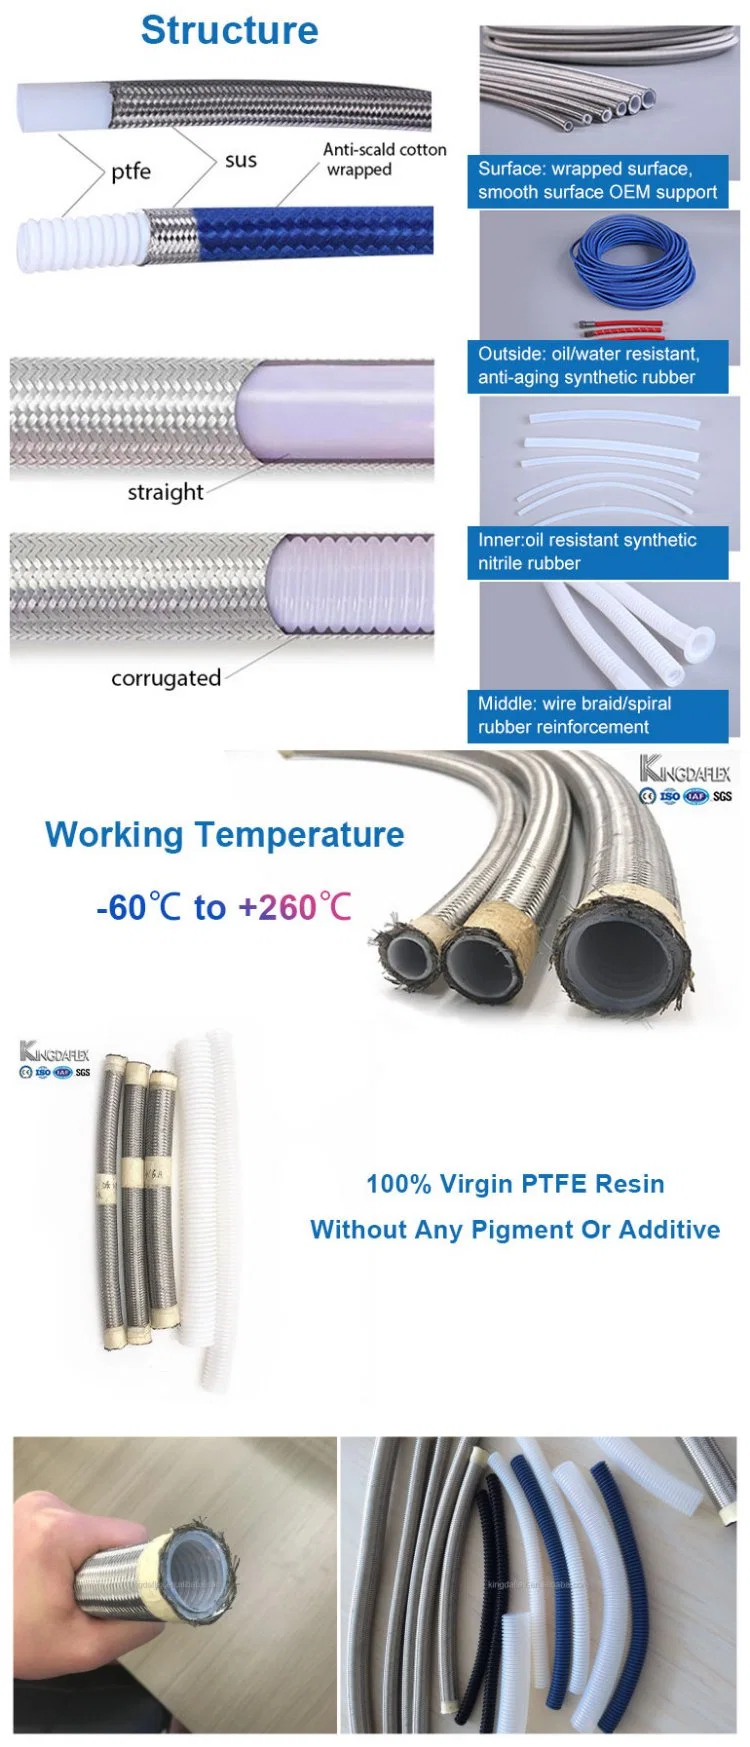 PTFE Ss Nylon Hose Auto Motorcycle High Pressure Hydraulic Assembly An8 PTFE Oil Cooler Hose Line